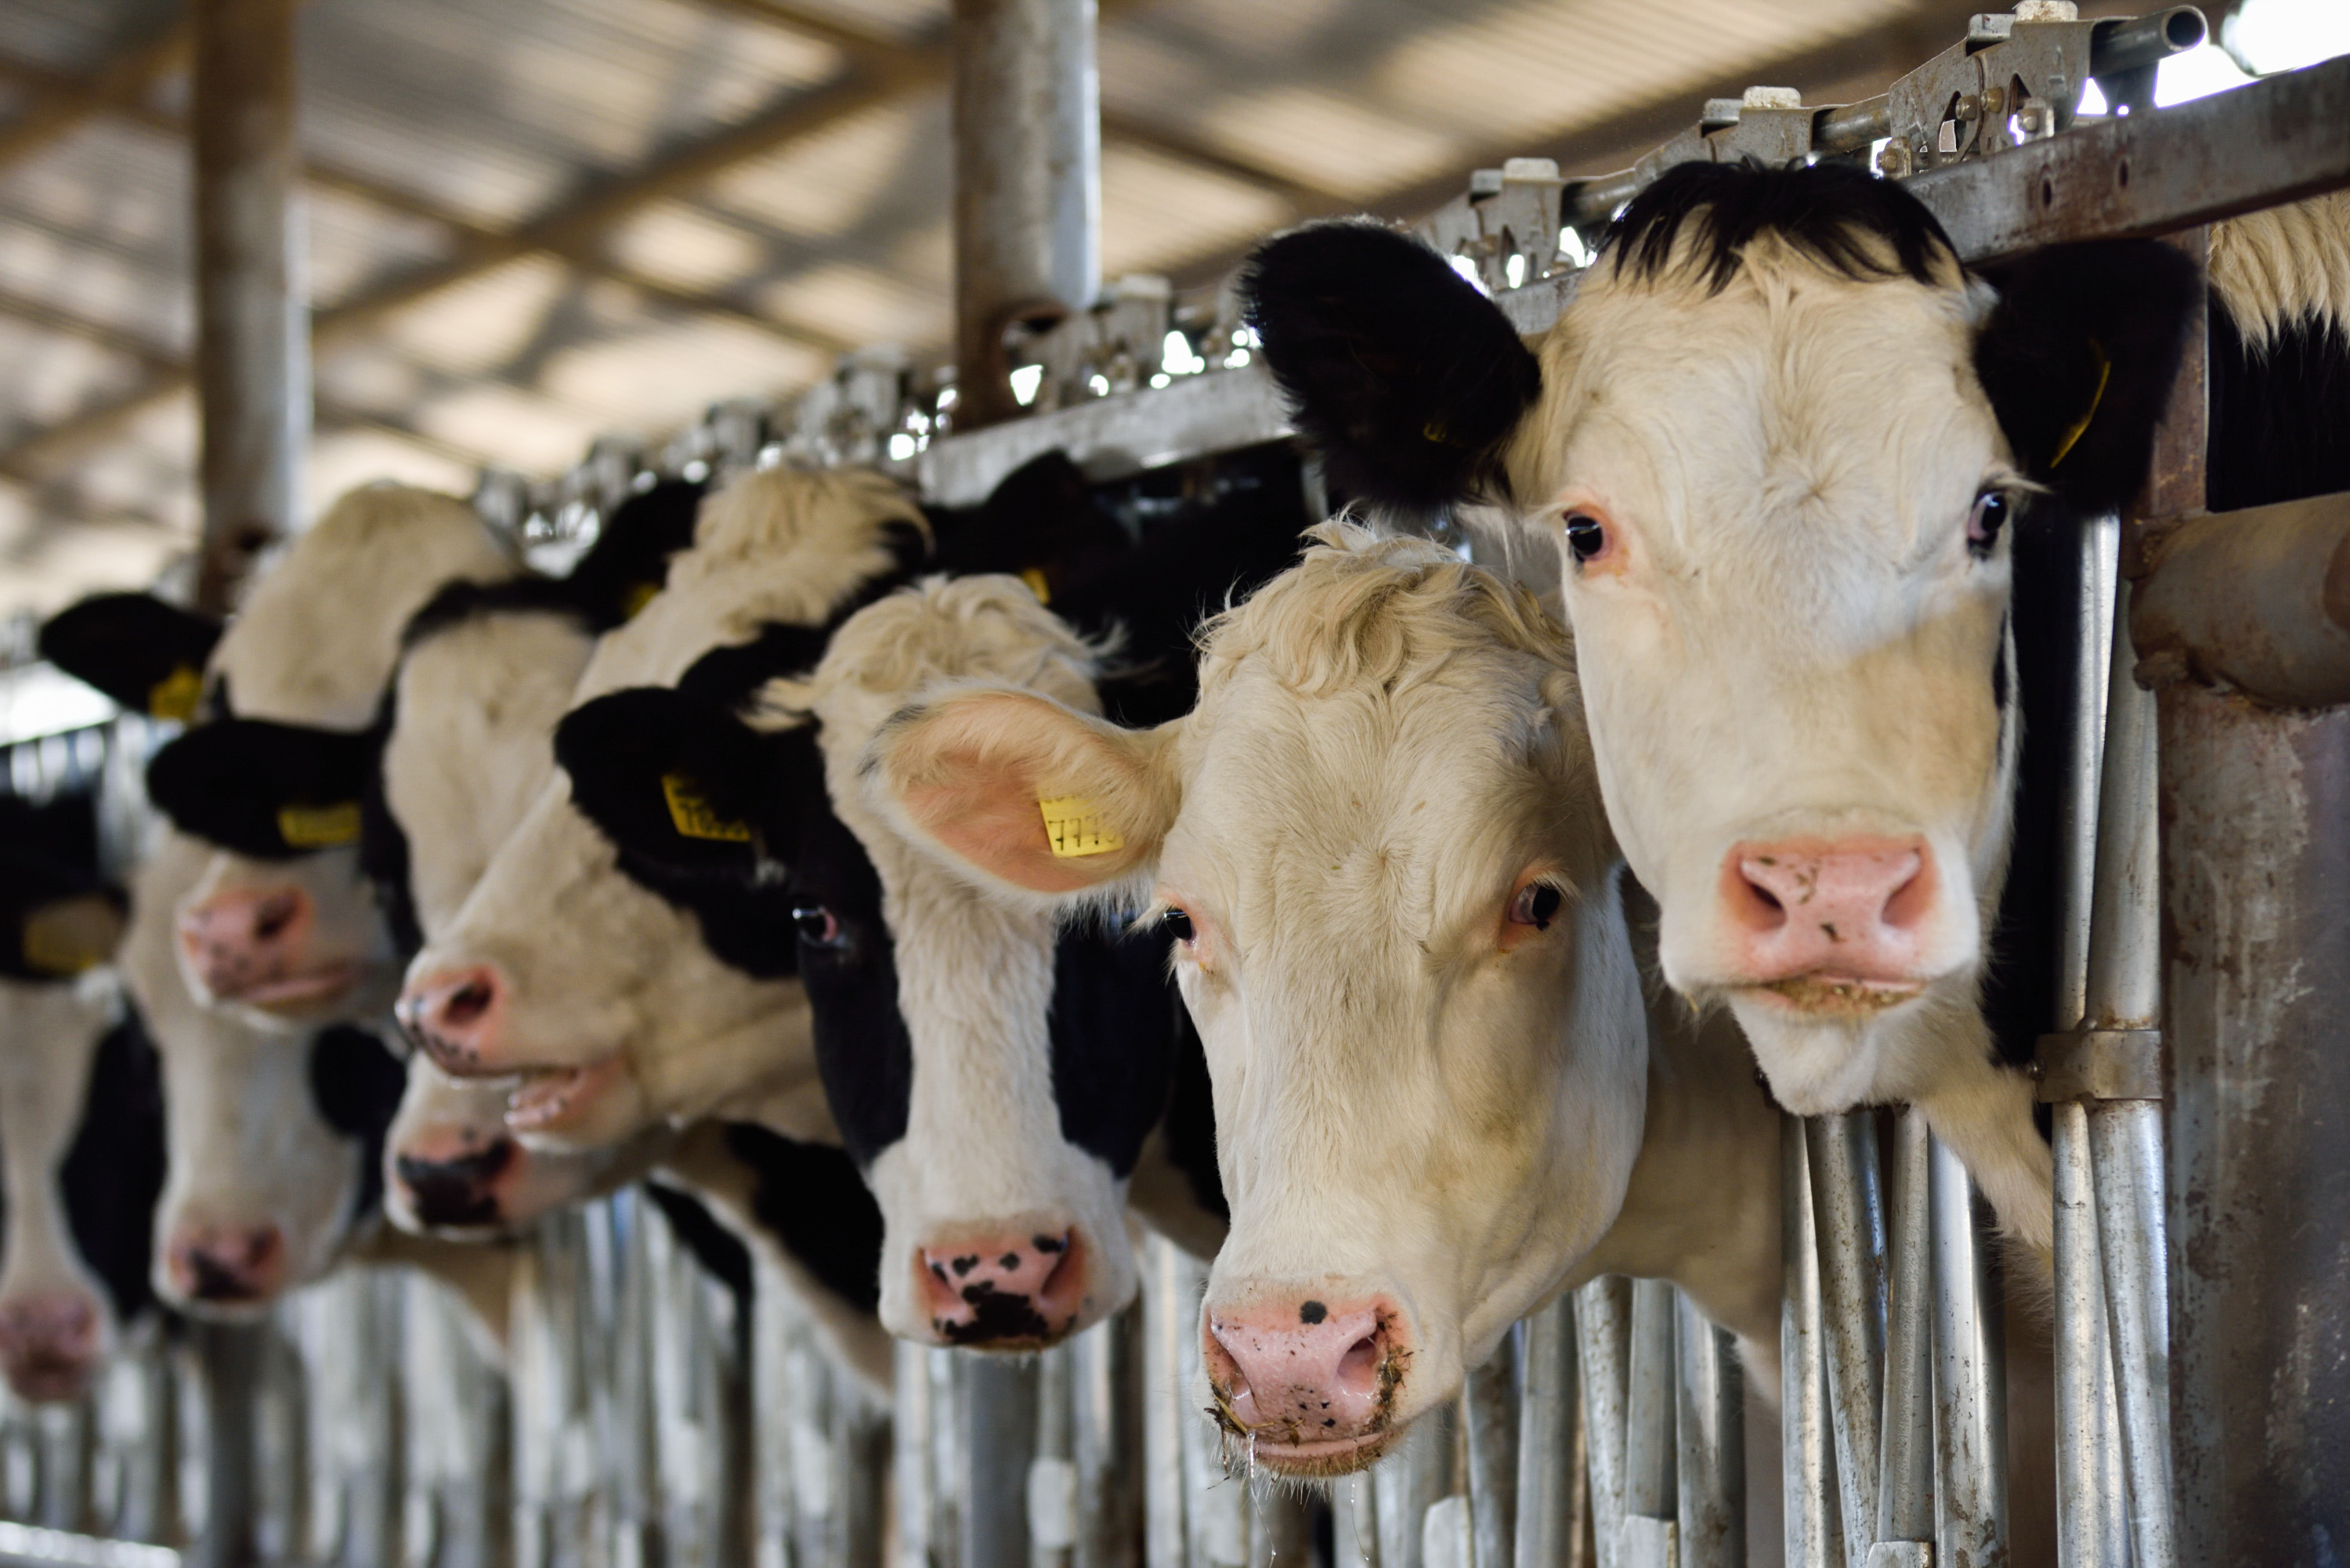 UKRPROMINVEST-AGRO reported results of its dairy segment and livestock production